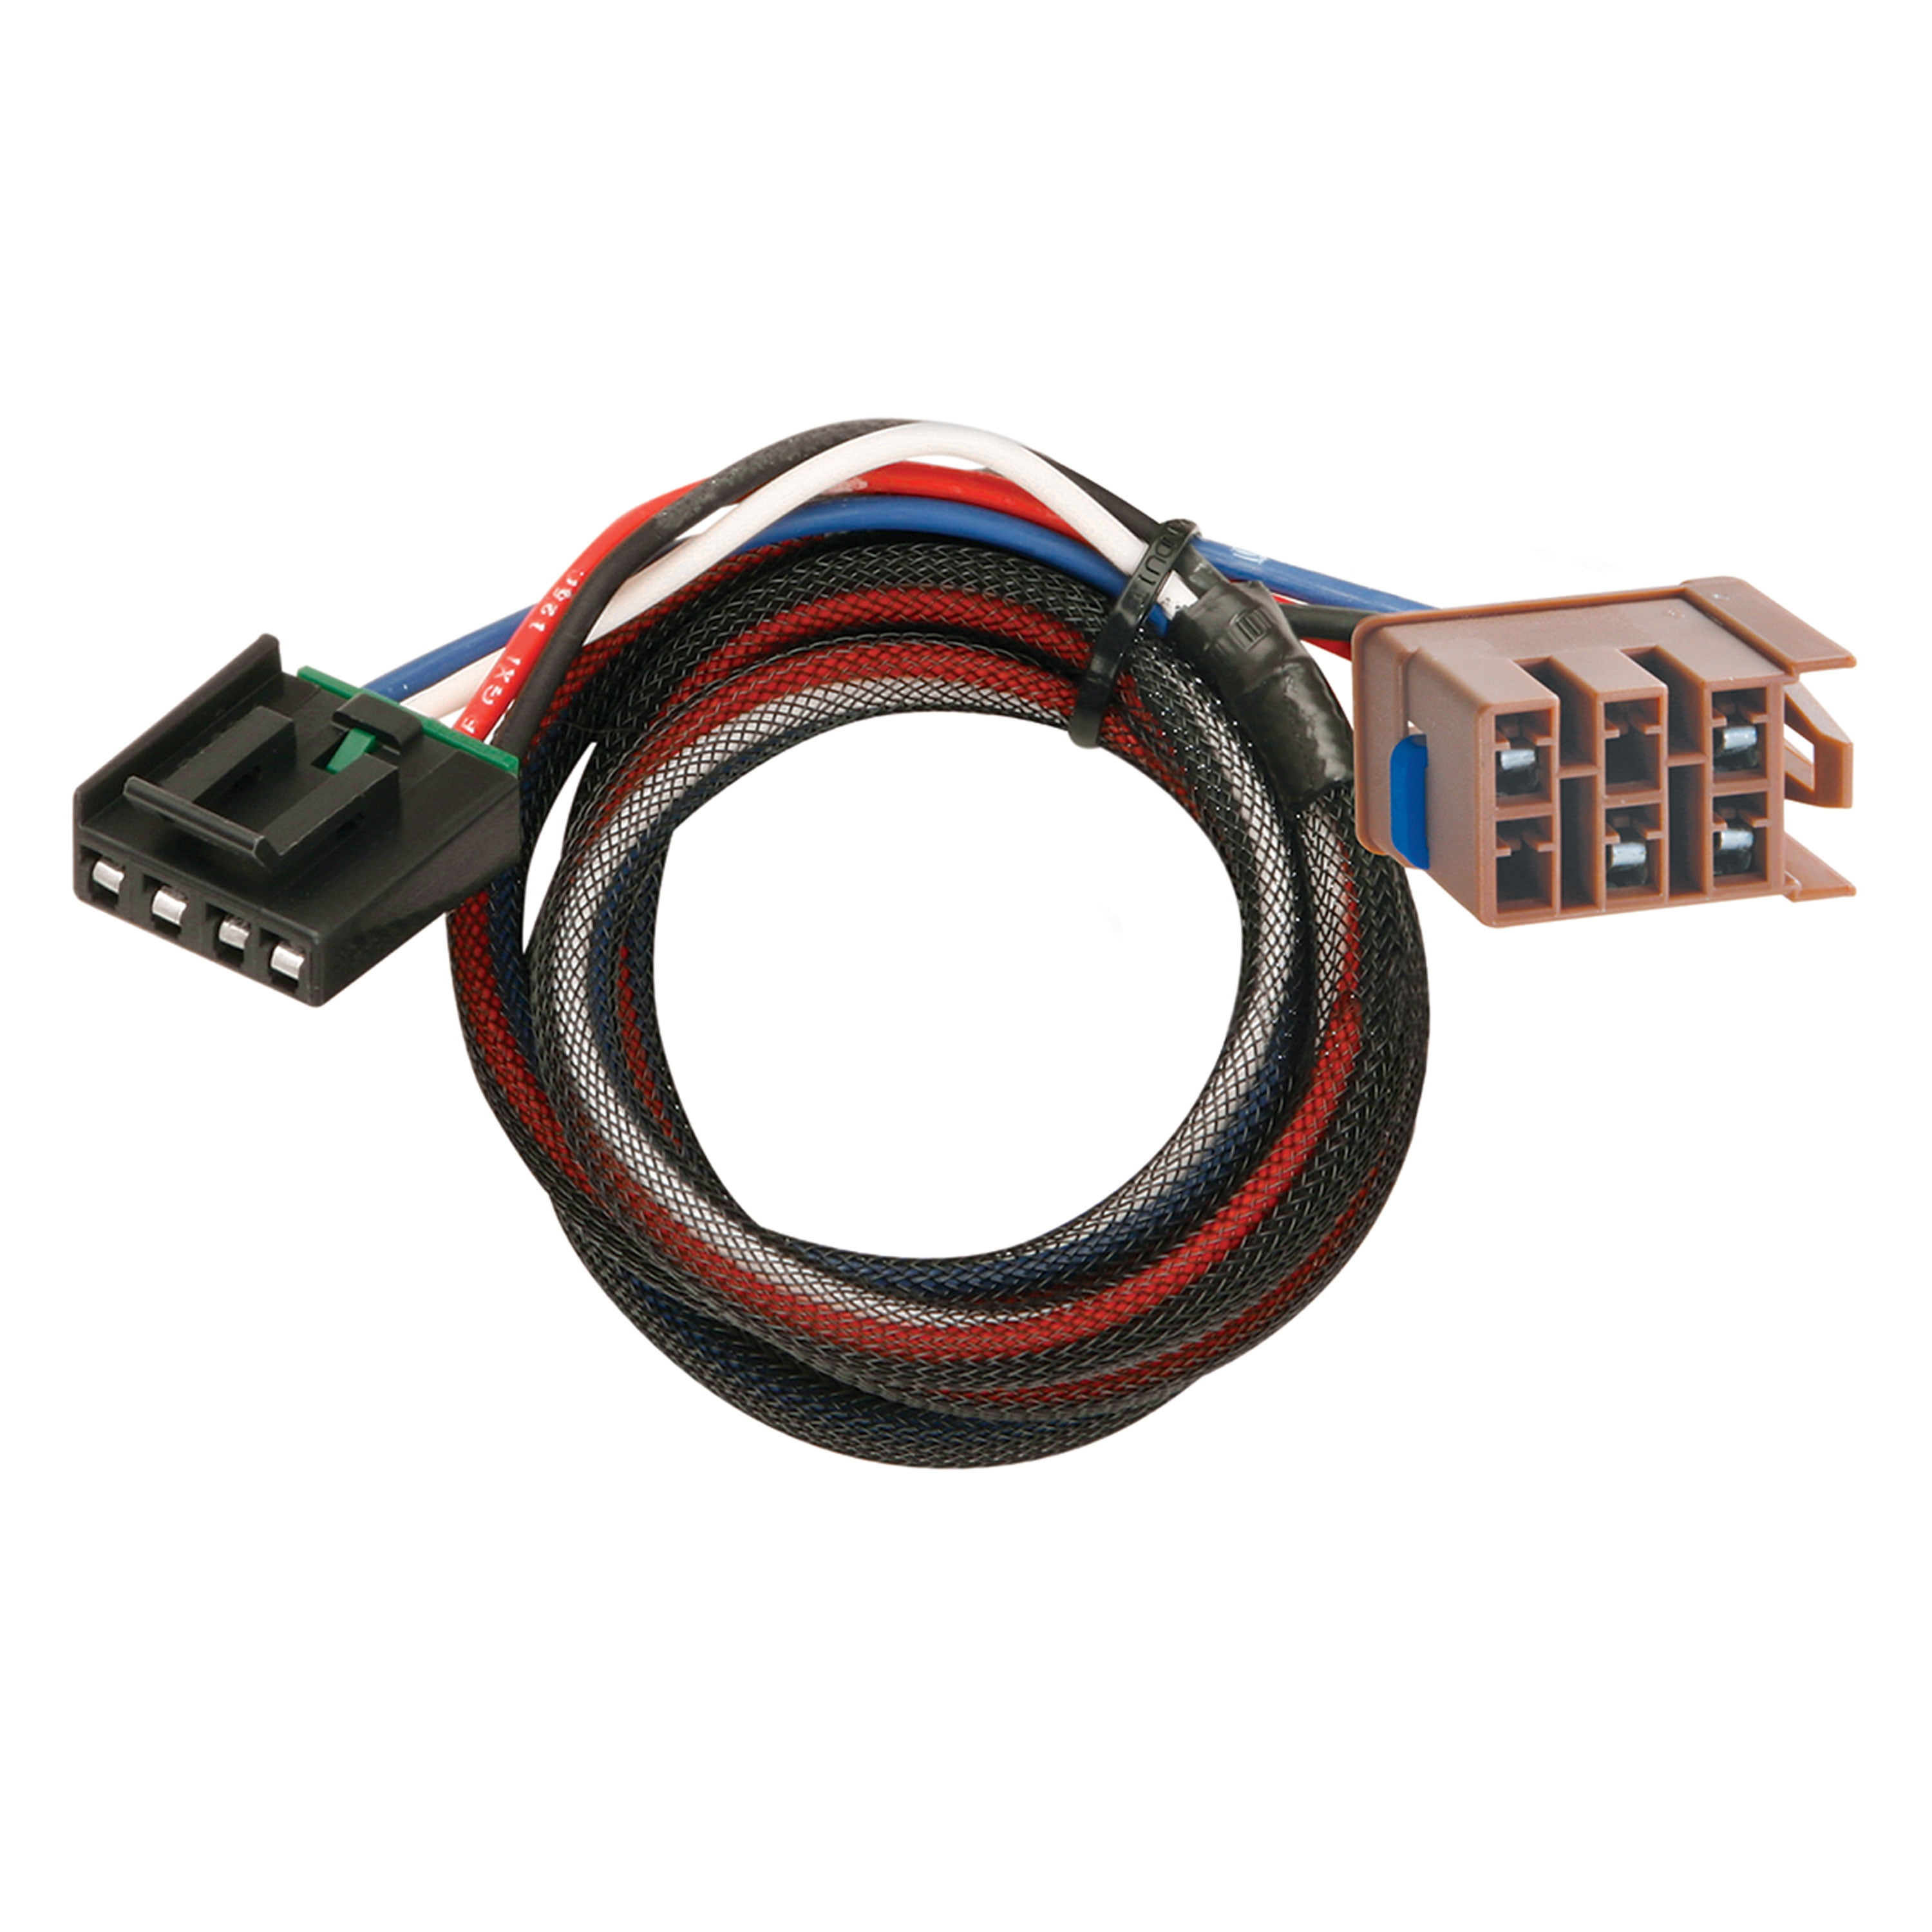 2006 Gmc Sierra Trailer Wiring Harness from i5.walmartimages.com